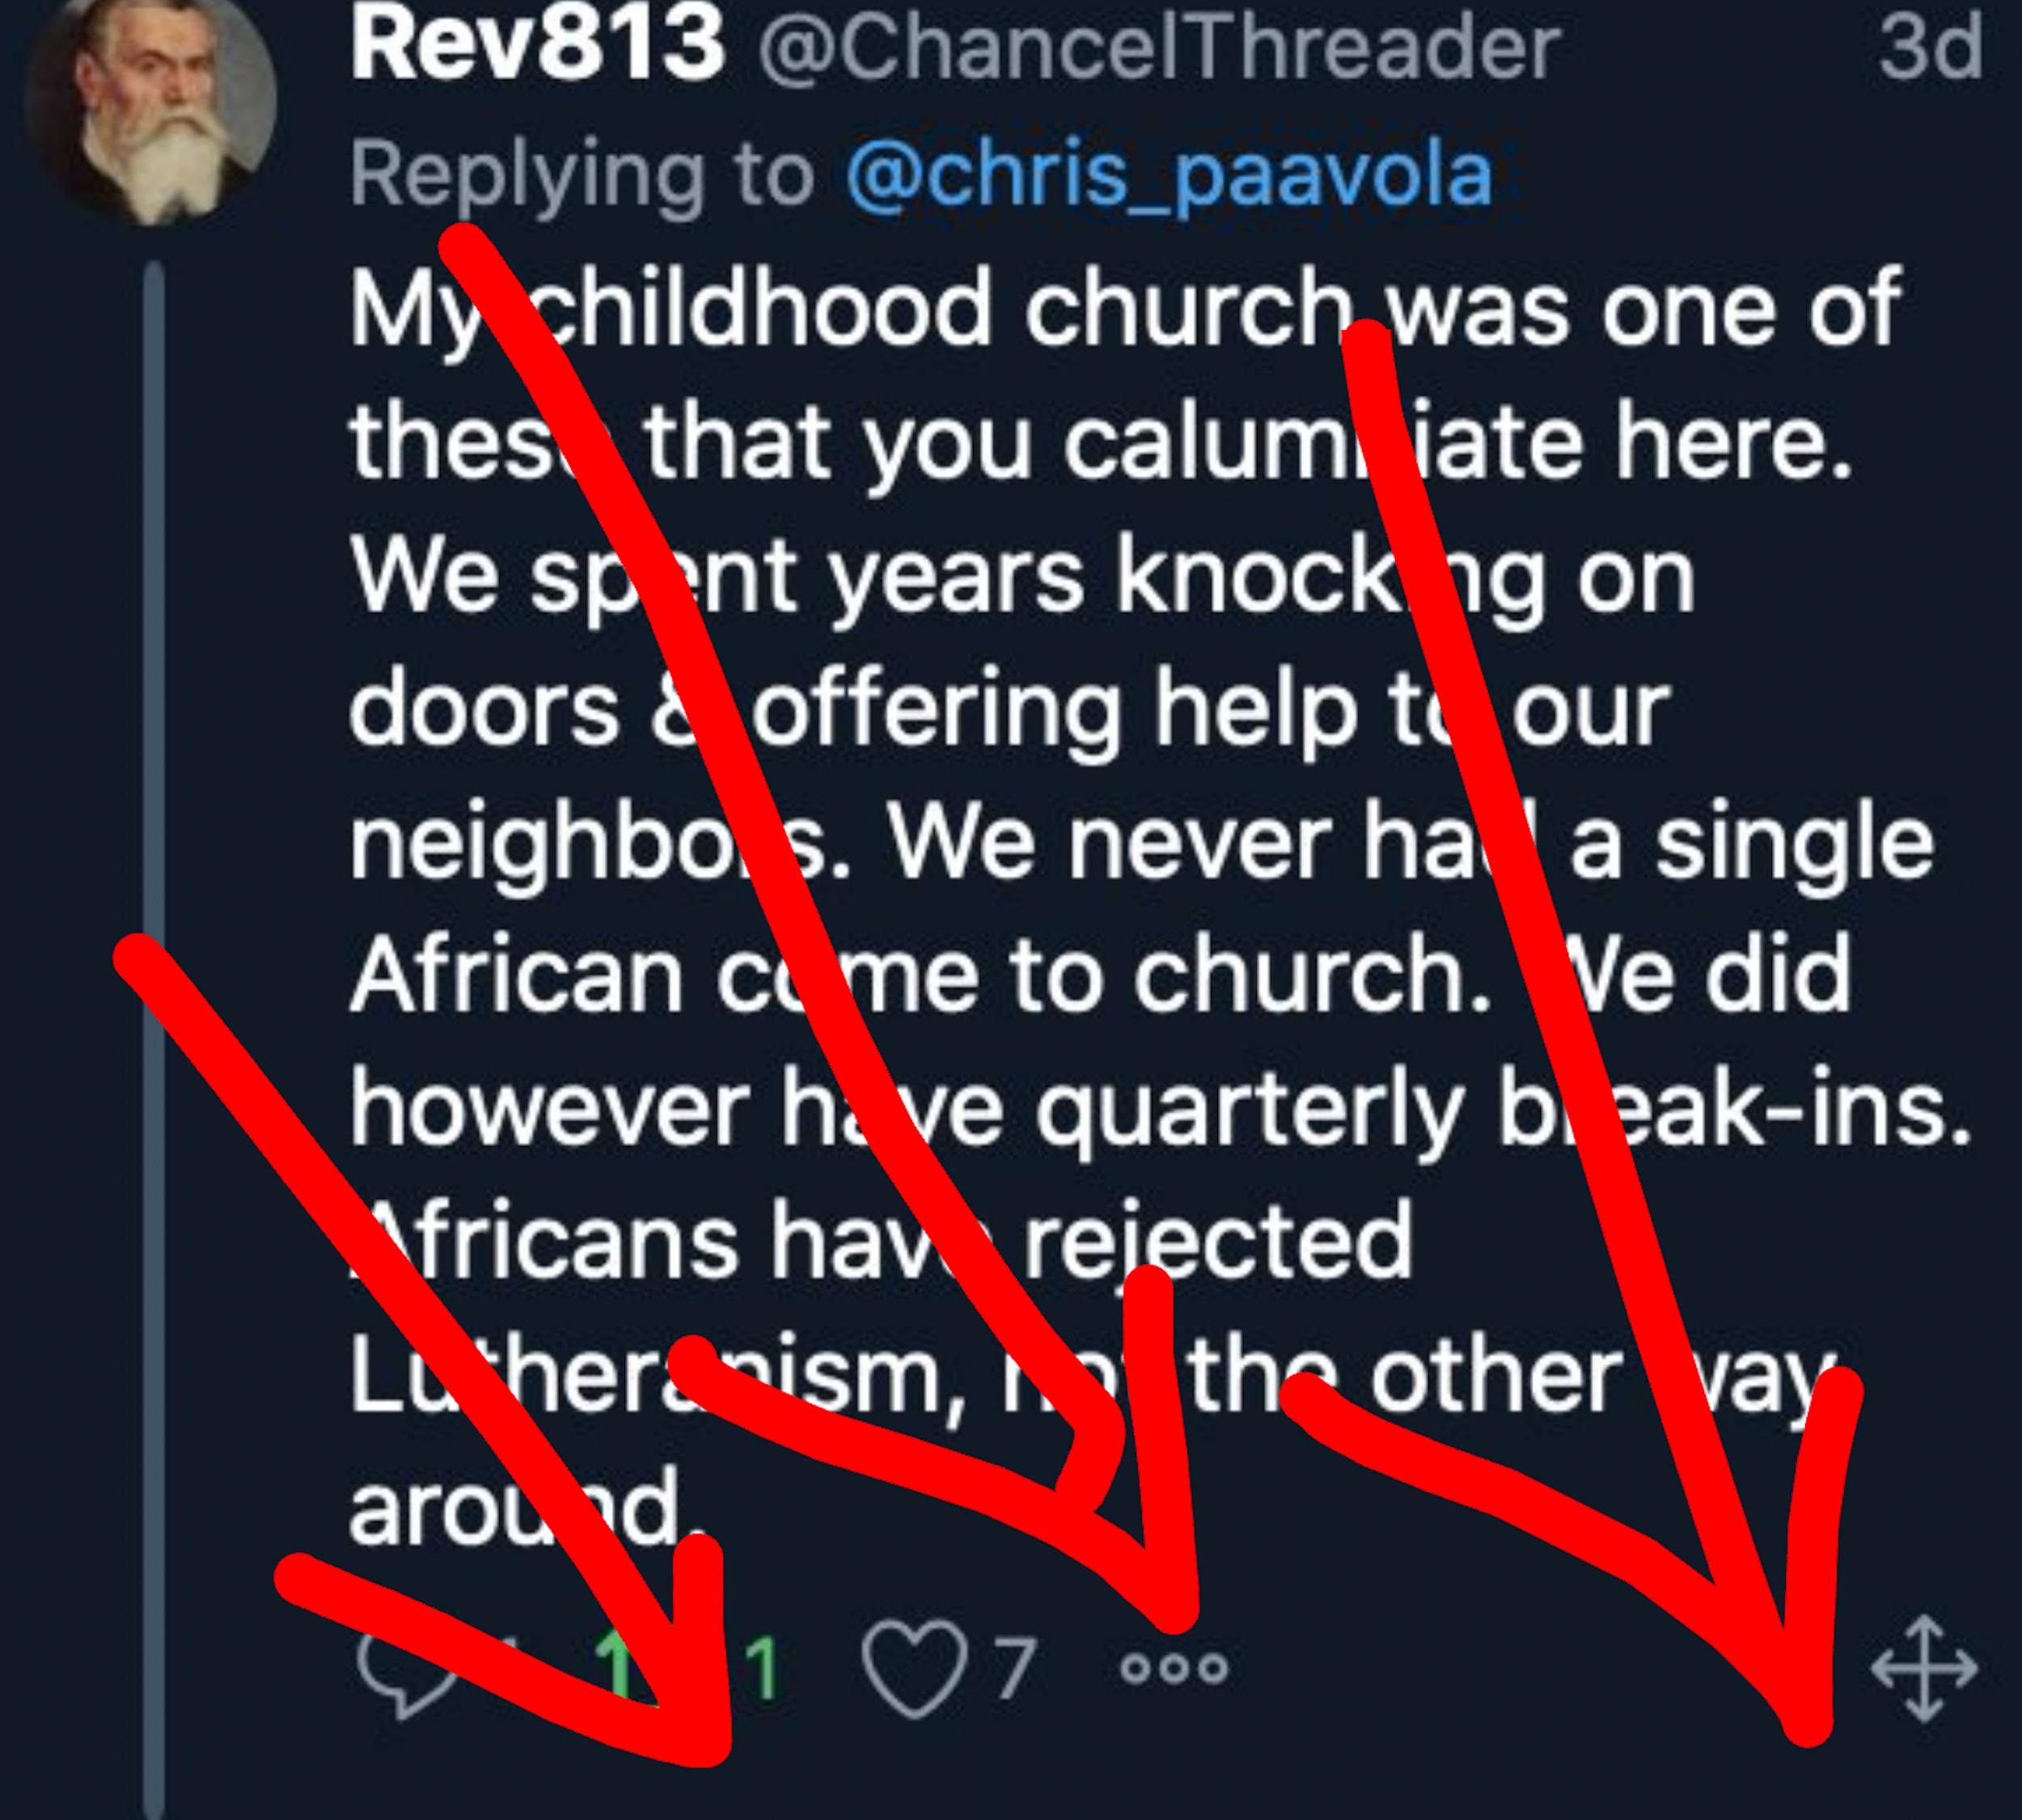 TW: anti-Black racism. Woe as Chancelthreader saying that Chris Paavola has “calumniated” his childhood church in his Relevant article on the LCMS and white flight, saying that "We never had a single African come to church" and that “Africans have rejected Lutheranism and not the other way around.”